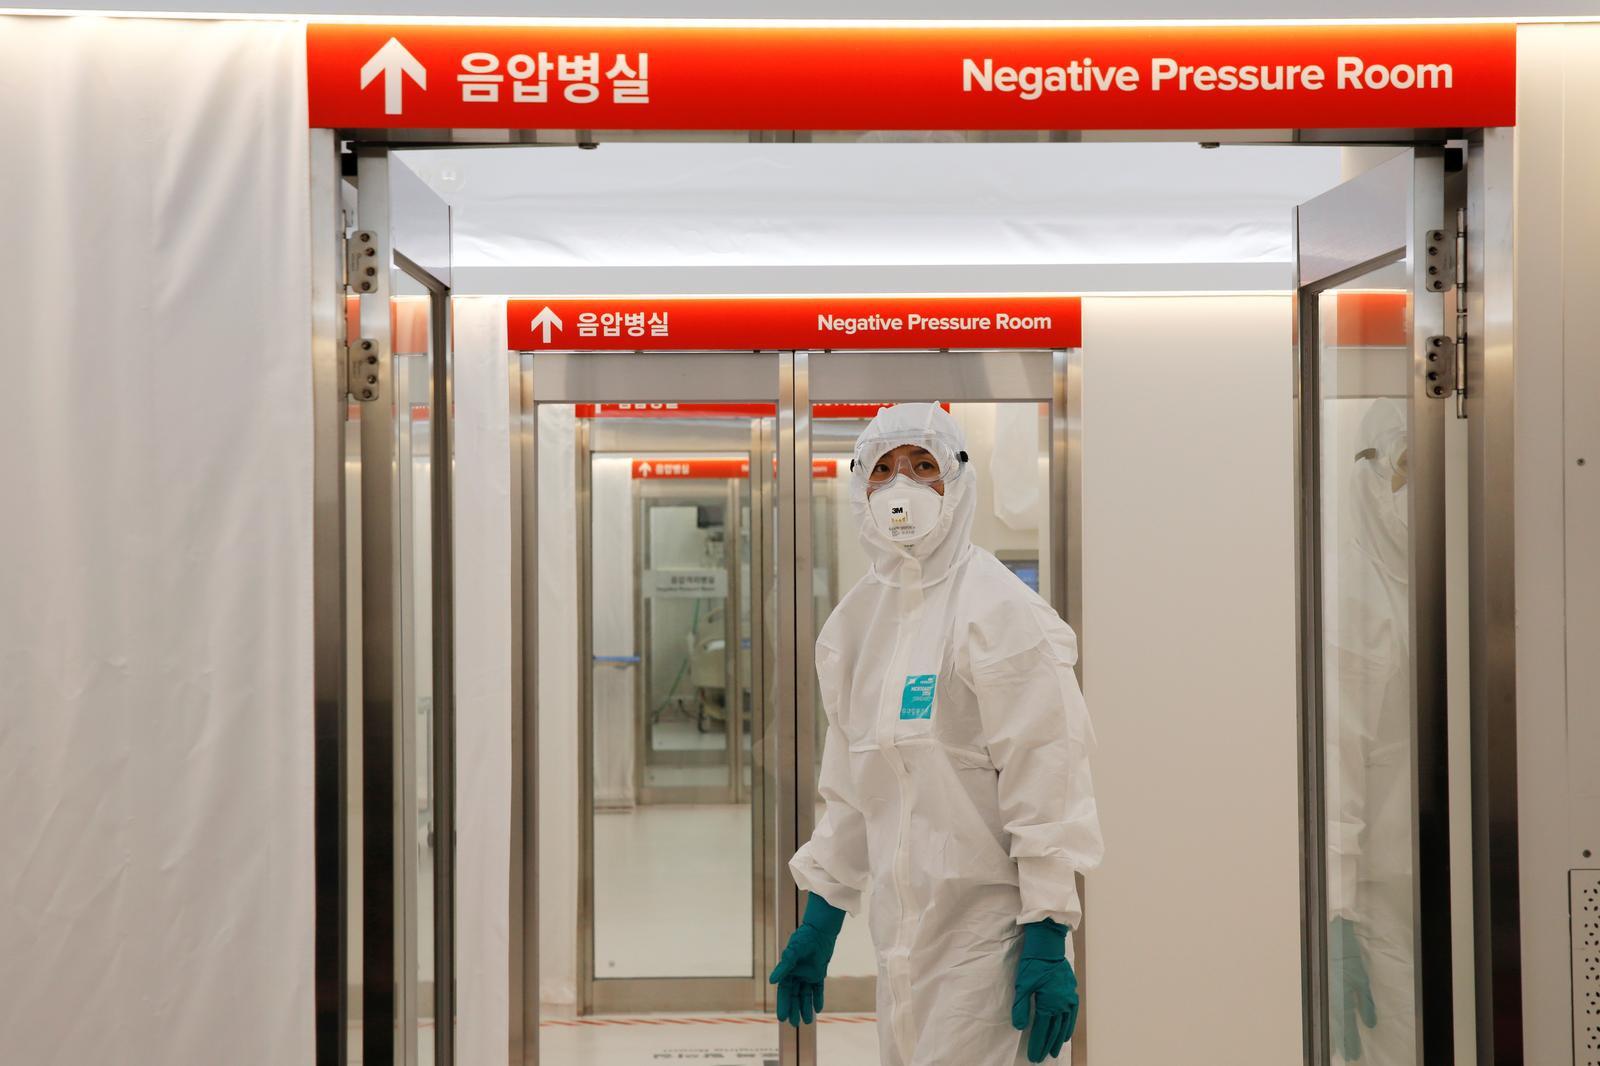 Strike threat by South Korean doctors fans fears of vaccine rollout disruption